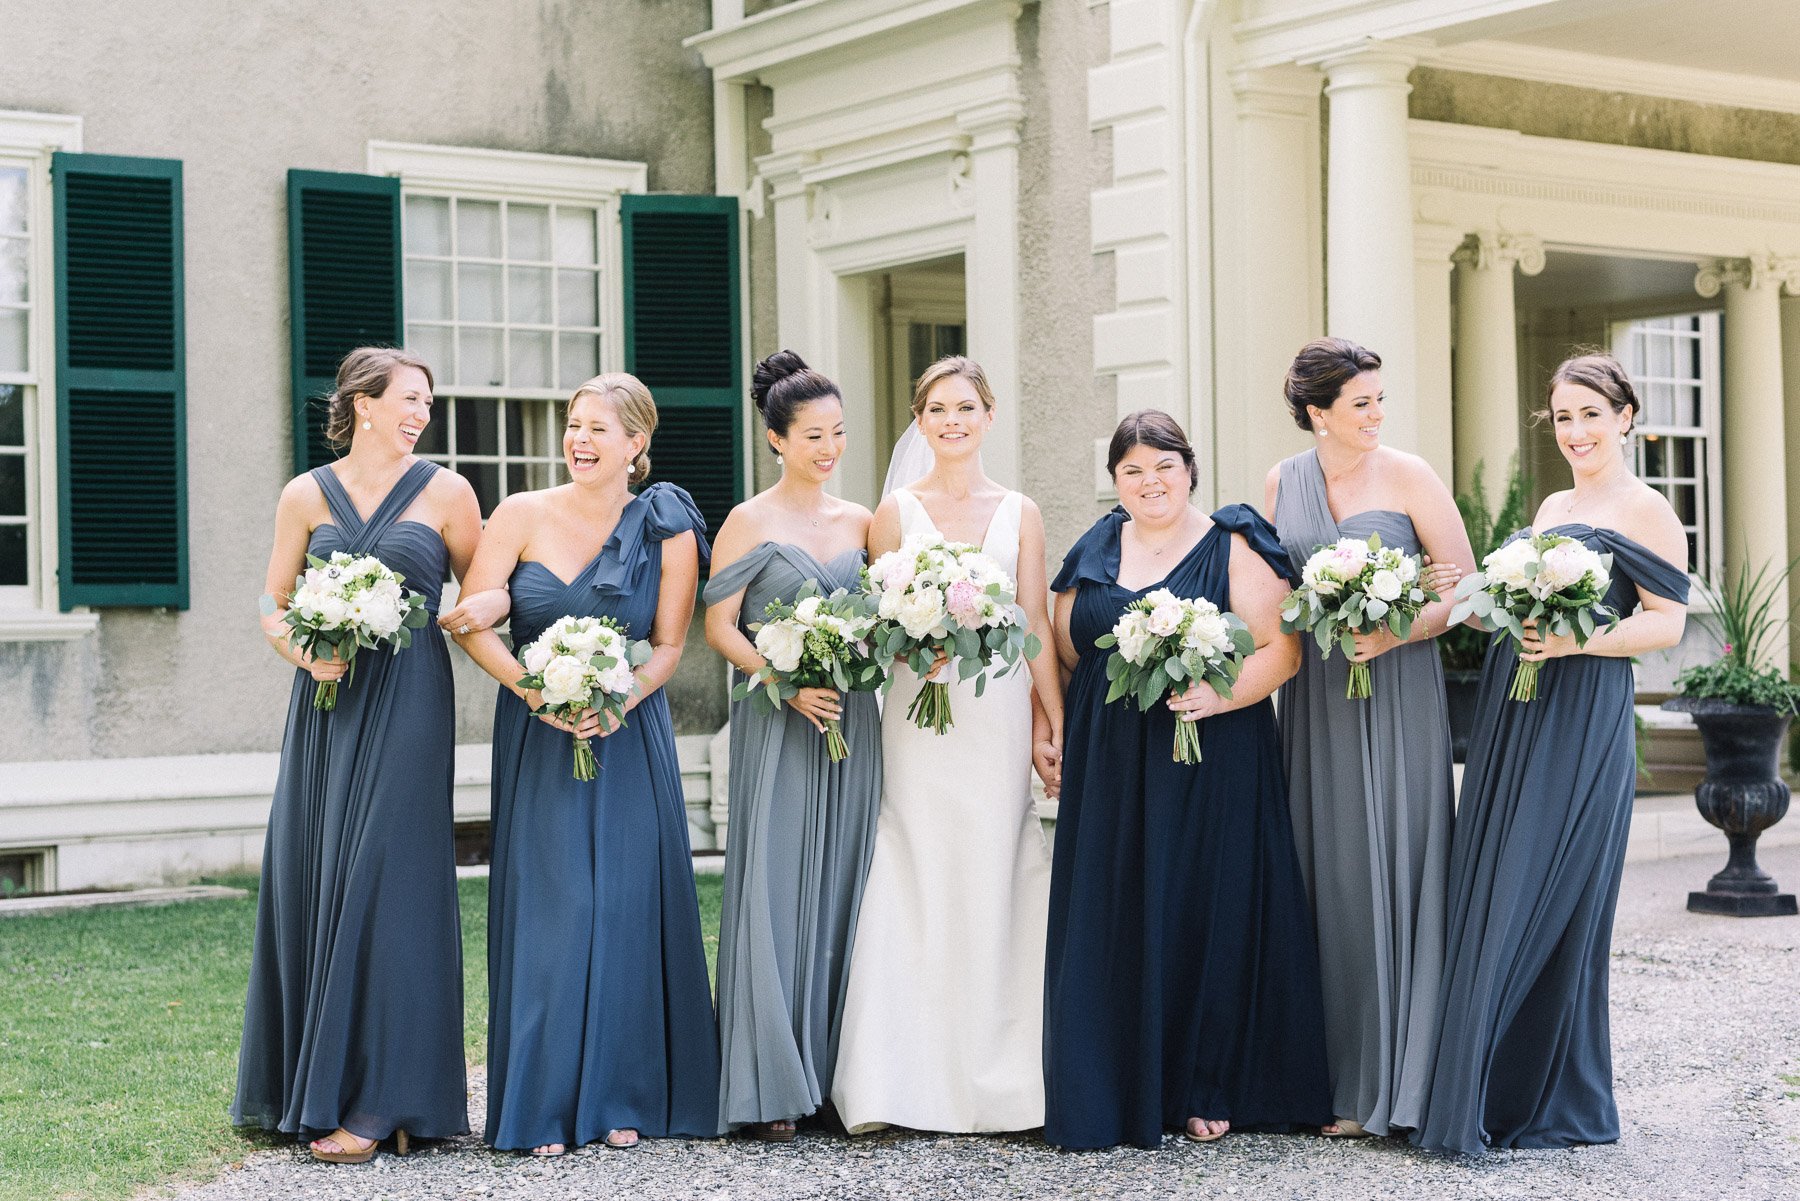 Manchester Vermont Wedding Bridesmaid Dresses in Shades of Blue